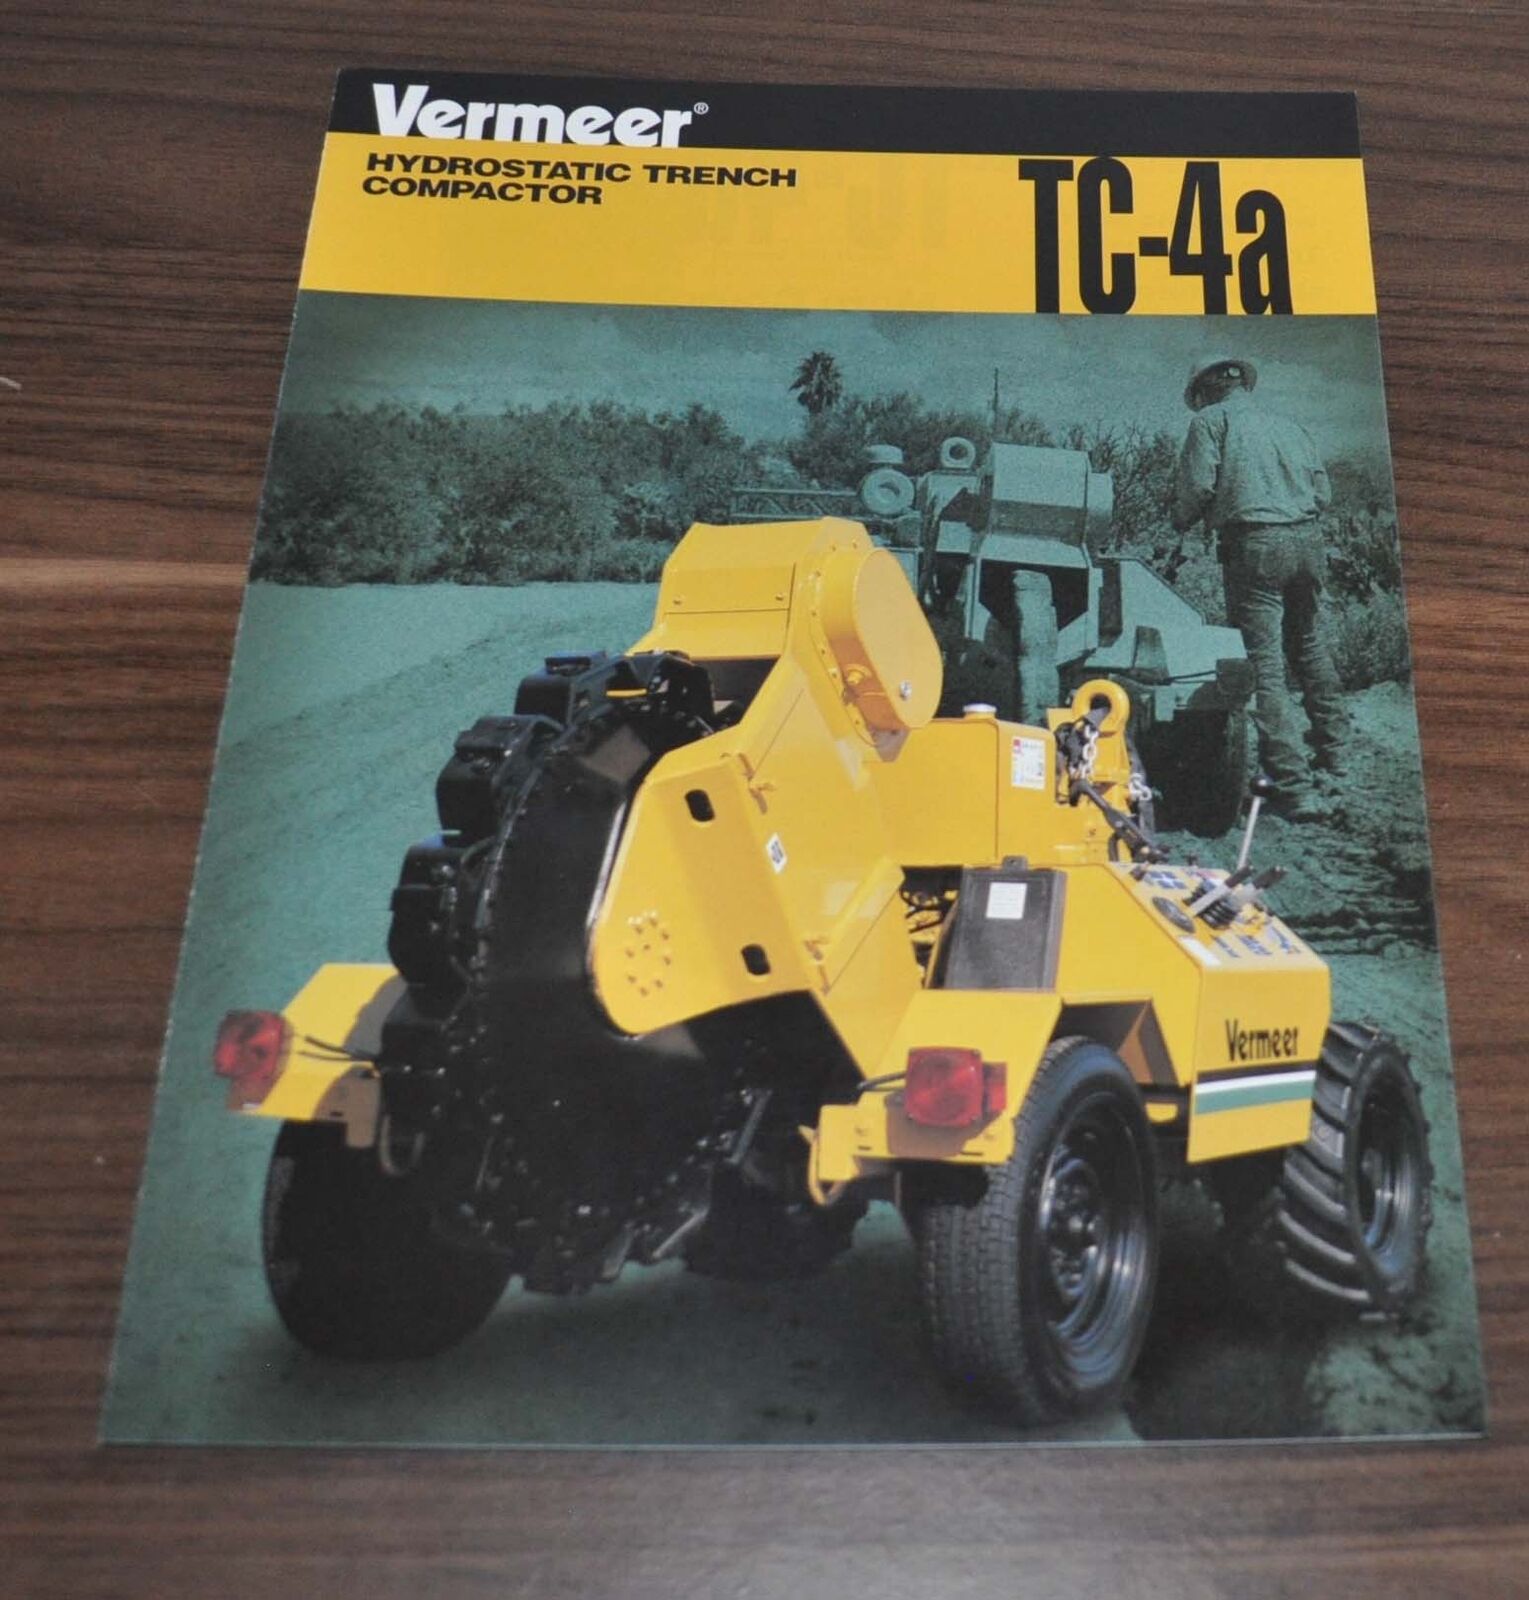 Vermeer Tc-4a Hydrostatic Trench Compactor Specifications Brochure Prospekt